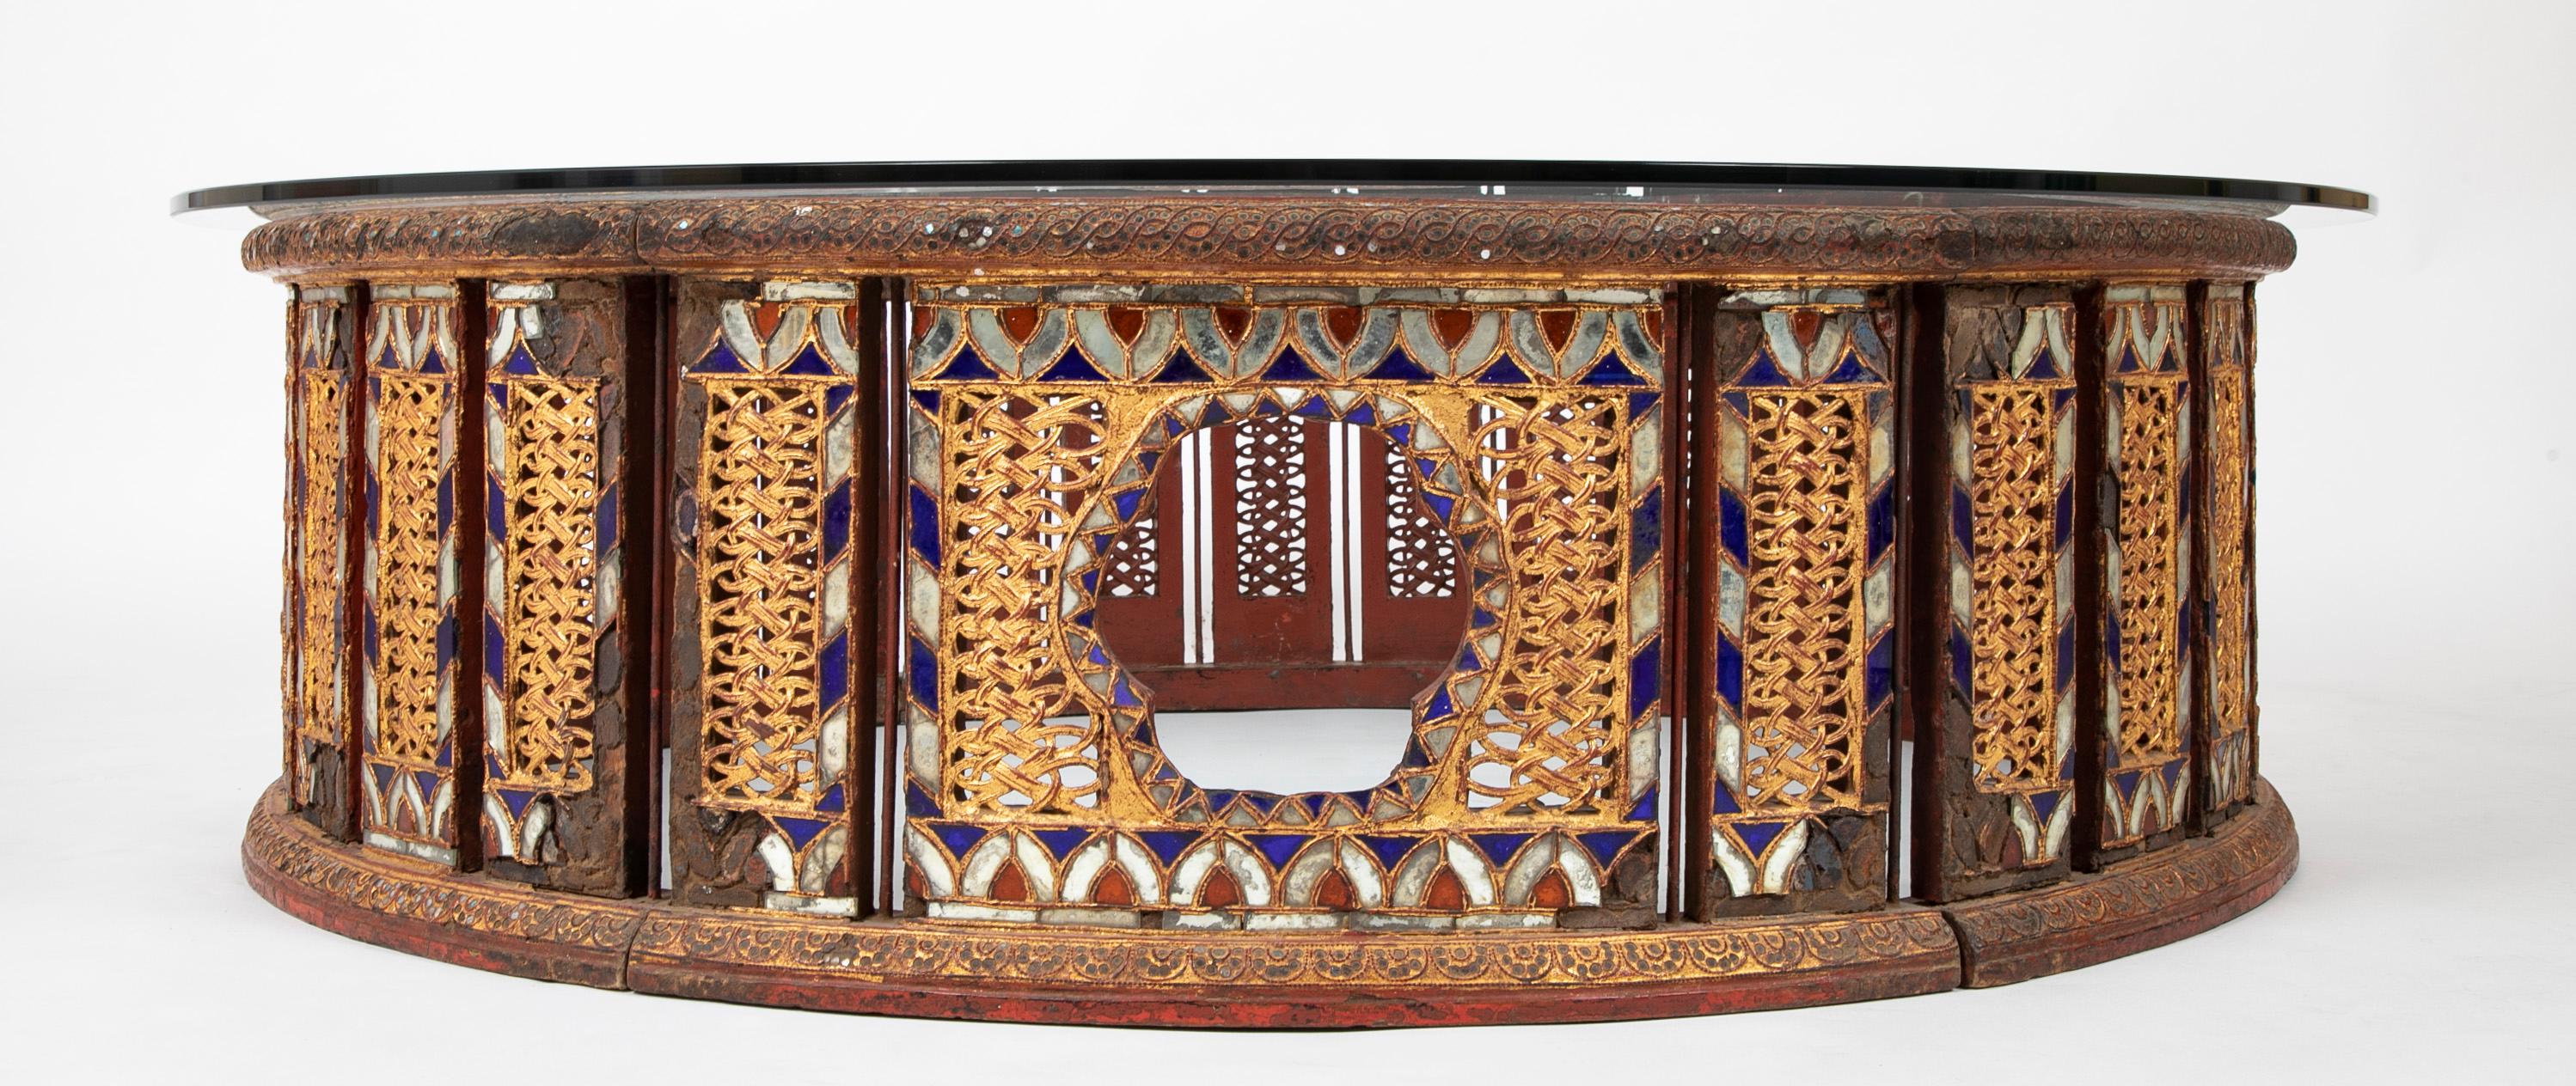 A very cool large scale round coffee or cocktail table, late 19th century, Burma (now Myanmar). Designed as six openwork curved panels that join to form a circle, connected by iron hinges with cotter pins, with a later glass top. Decorated with